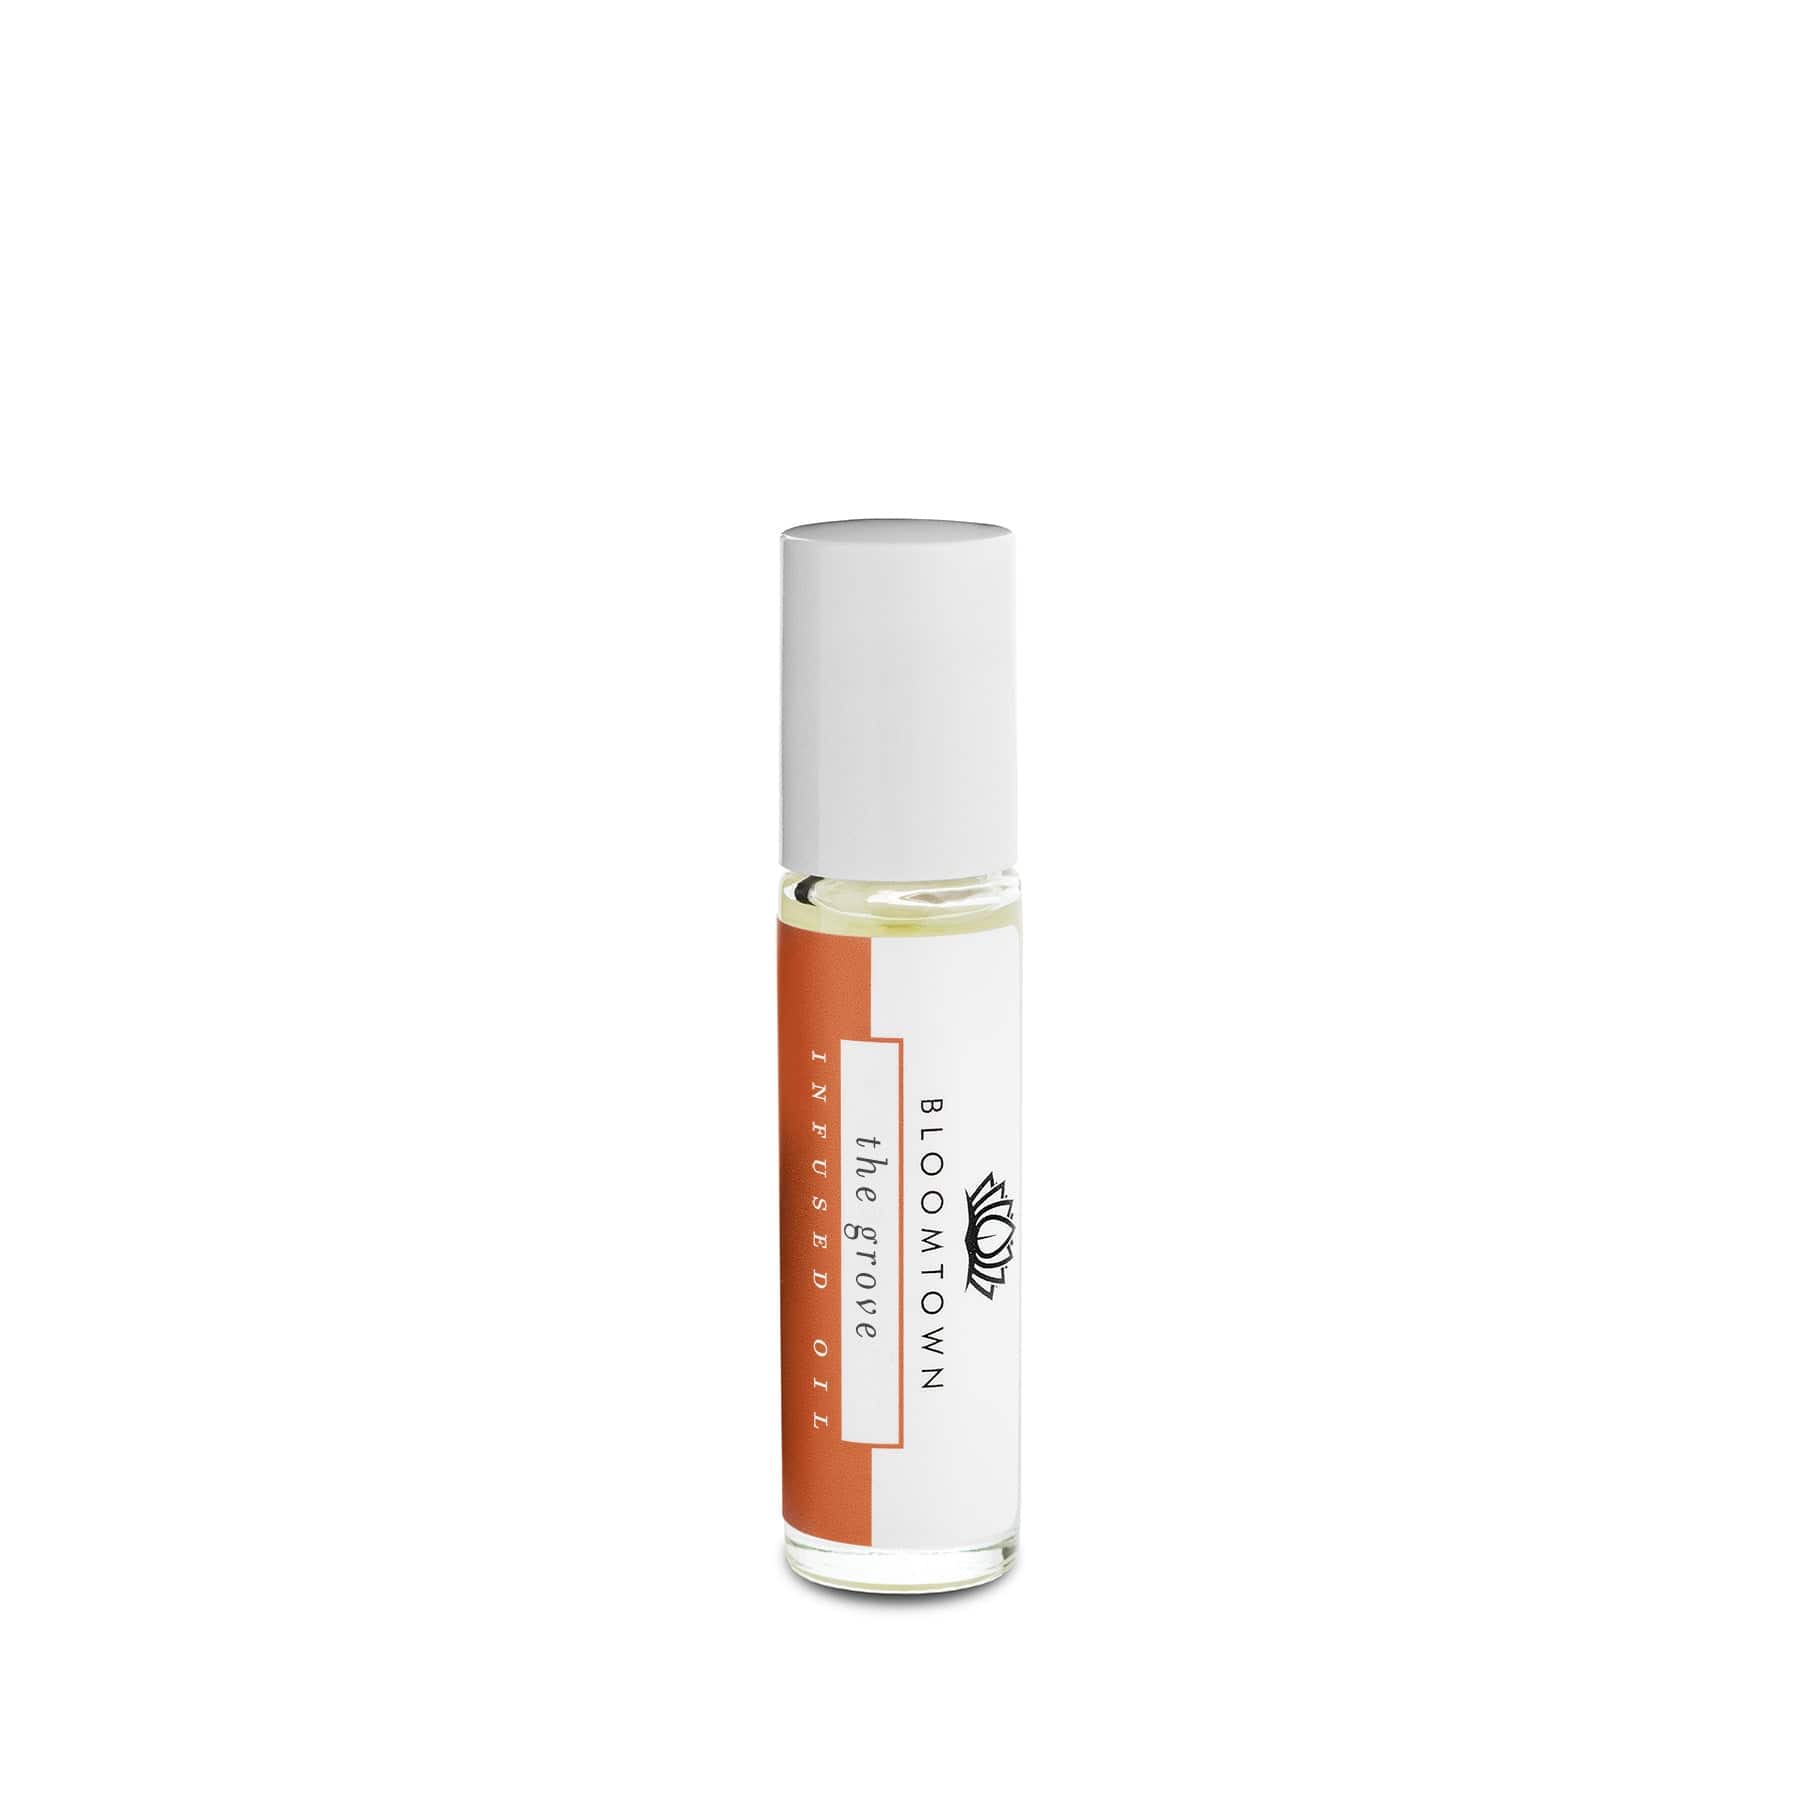 Roll-on fragrance oil in clear glass vial with white cap and orange label, isolated on white background.